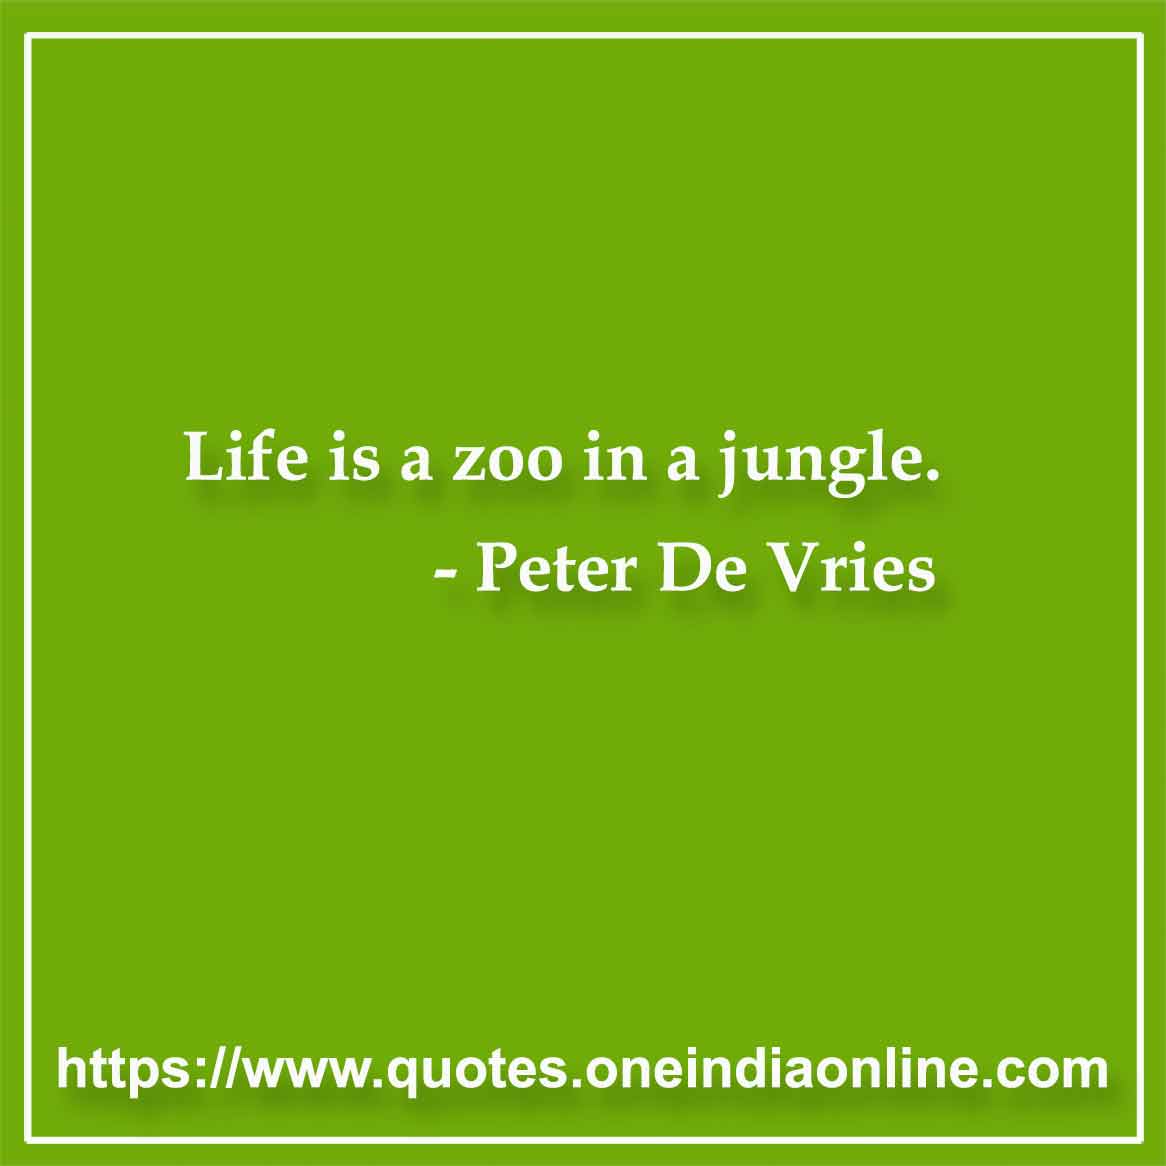 Life is a zoo in a jungle.

-  by Peter De Vries